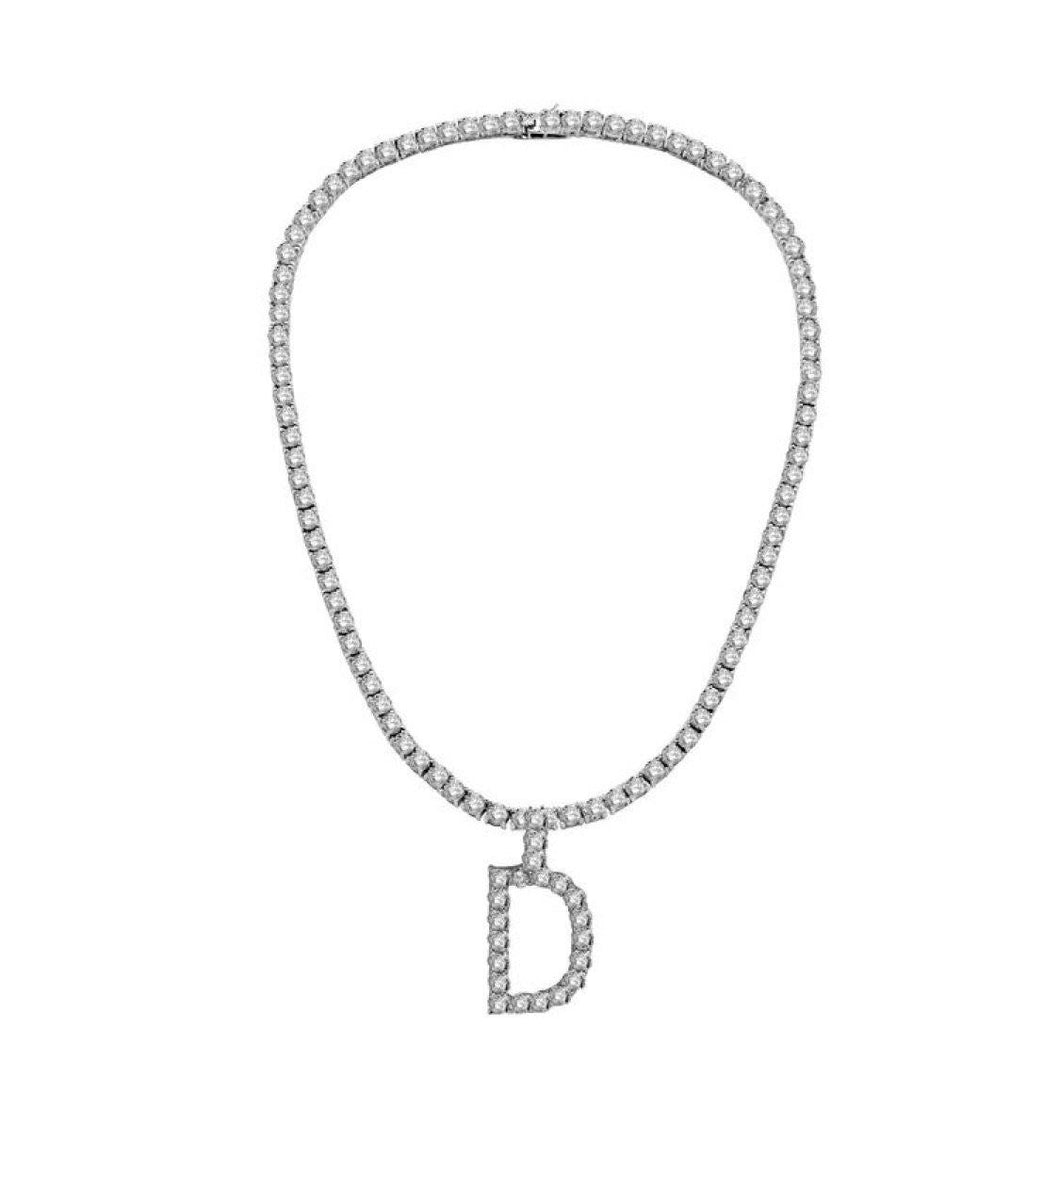 Icy Initial Tennis Necklace - ANGIE MAR 